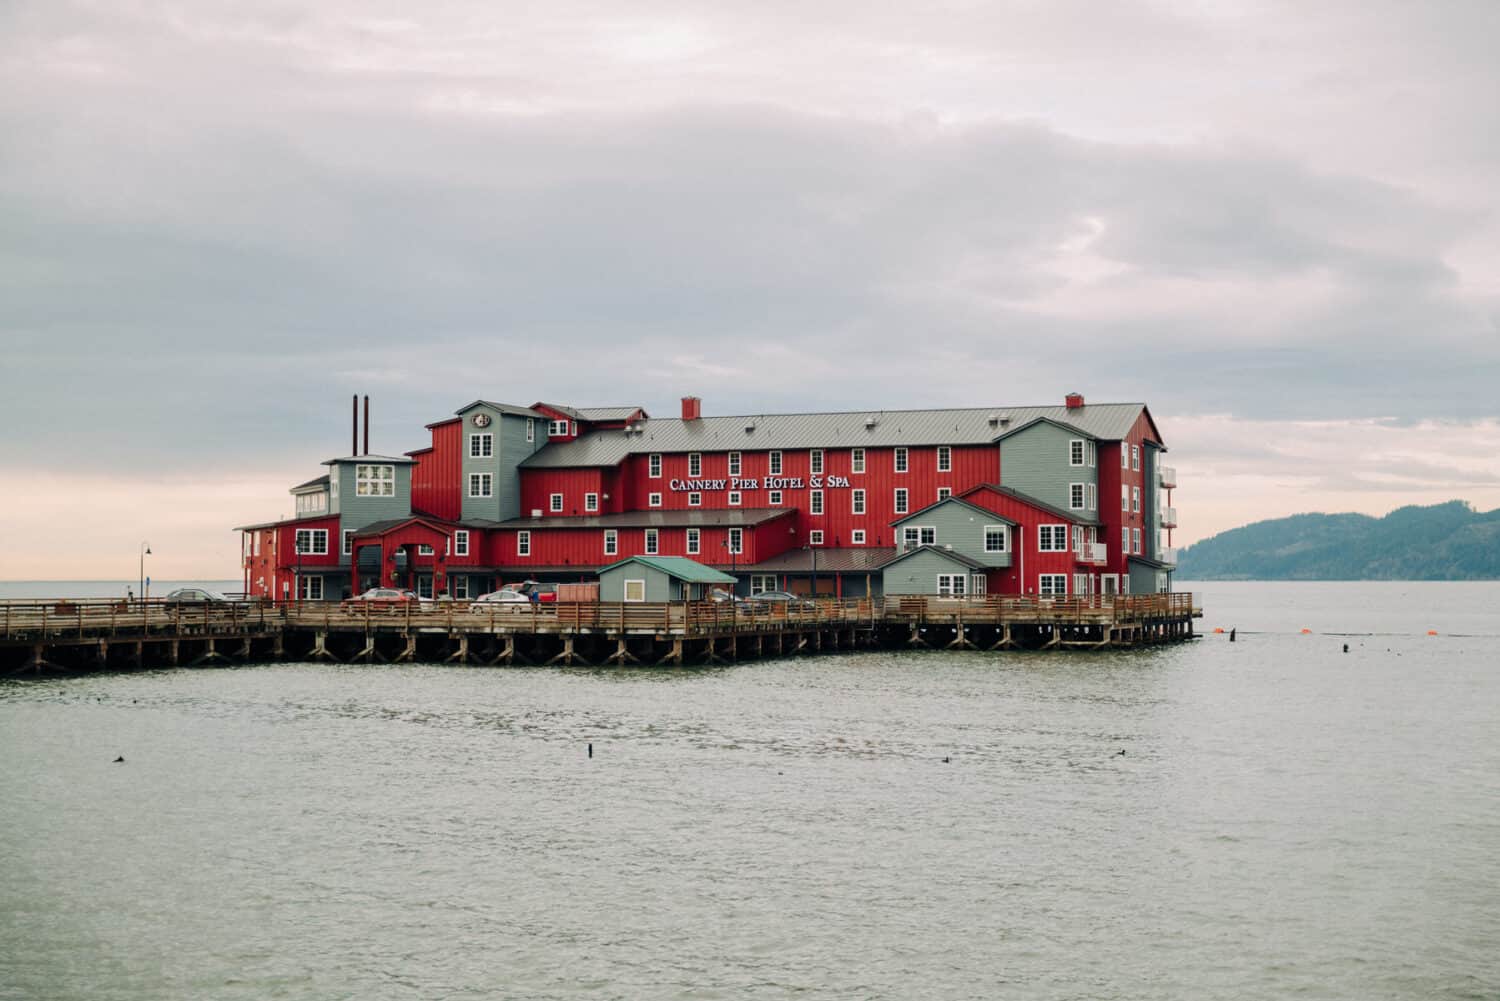 Cannery Pier Hotel Exterior